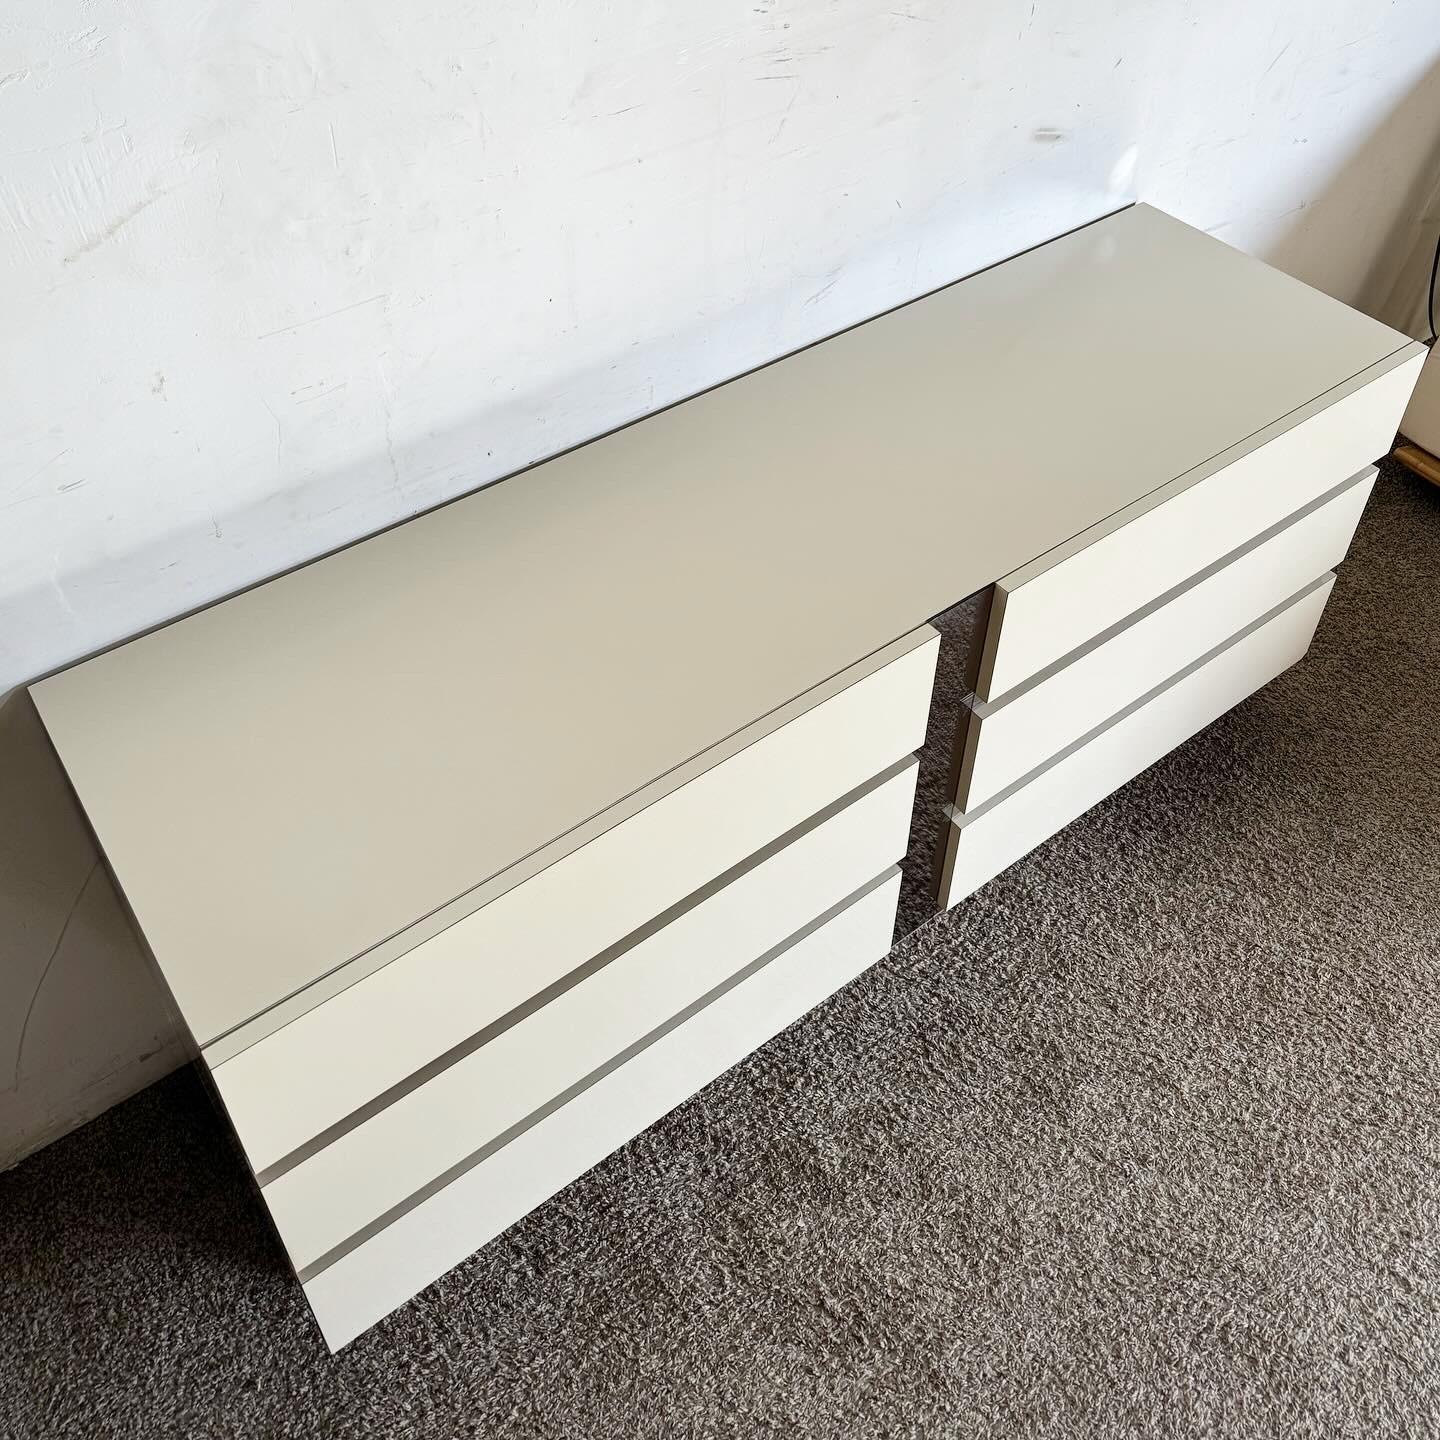 Postmodern Cream Lacquer Laminate and Glass Mirror Dresser - 6 Drawers For Sale 3